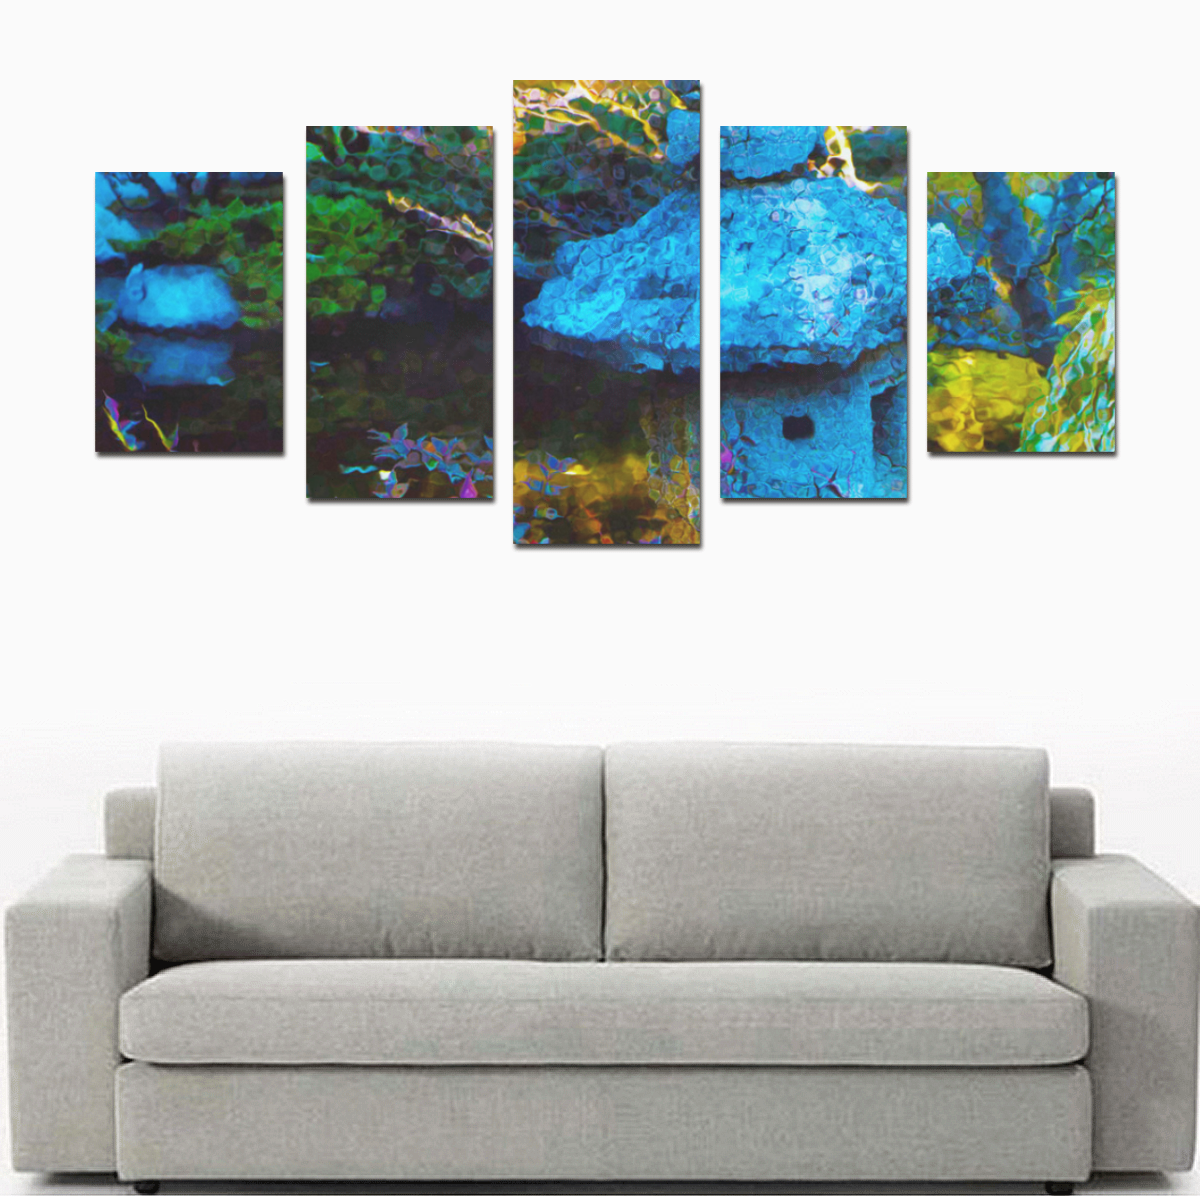 Japanese Painted Garden Canvas Print Sets D (No Frame)